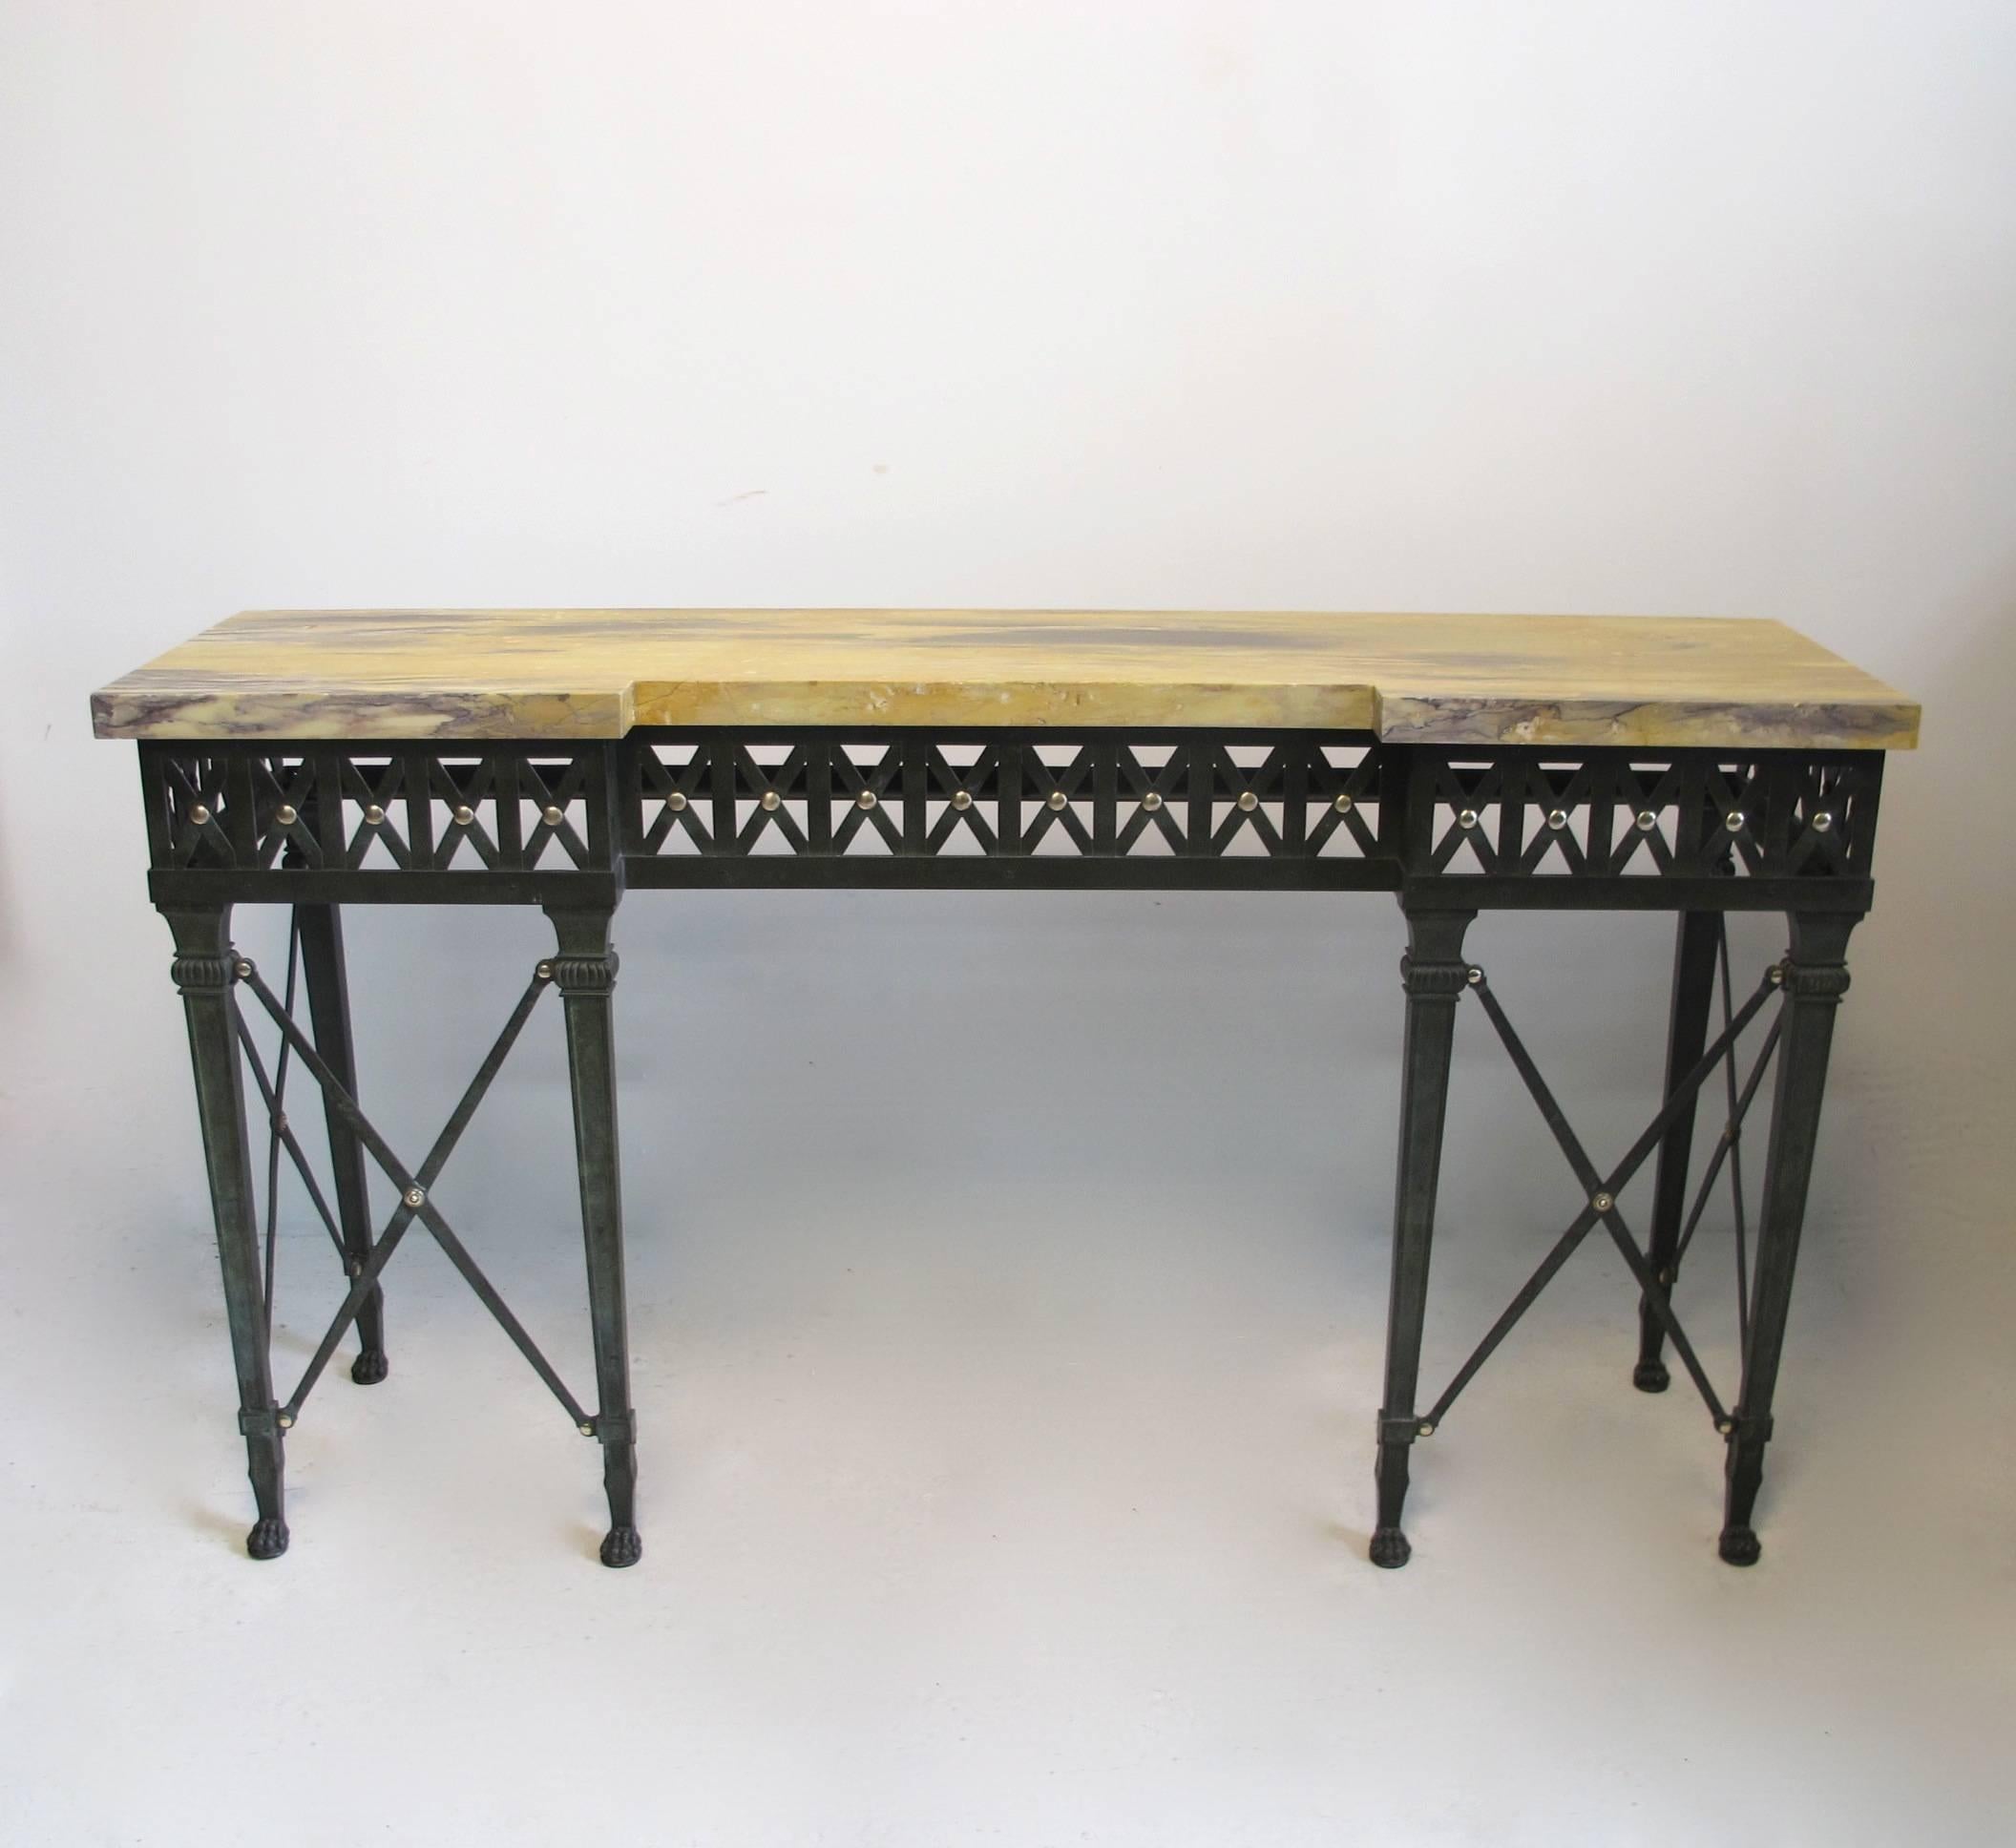 Bronze and iron neoclassical style console table with original marble top and beautiful old patina. Marble top shows expected signs of age and wear with some old repairs.